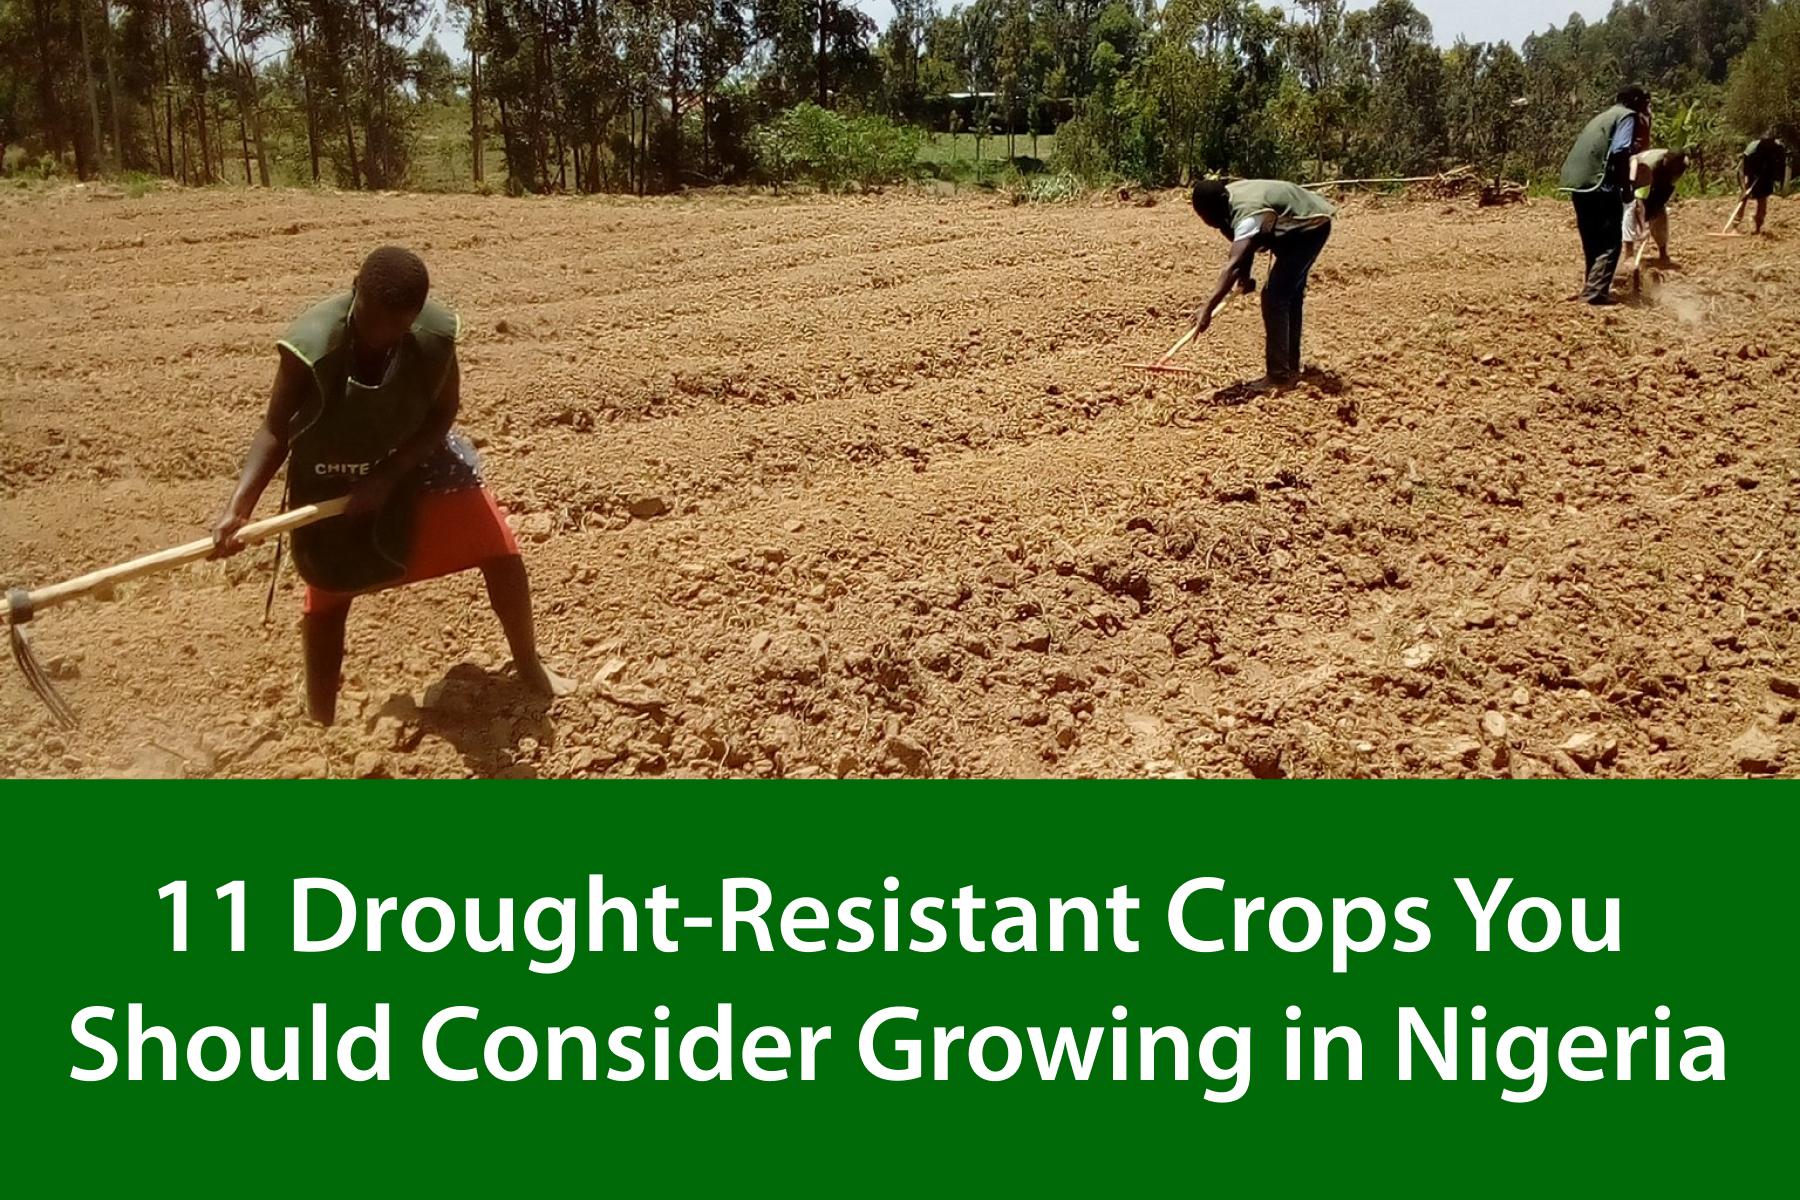 11 Drought-Resistant Crops You Should Consider Growing in Nigeria